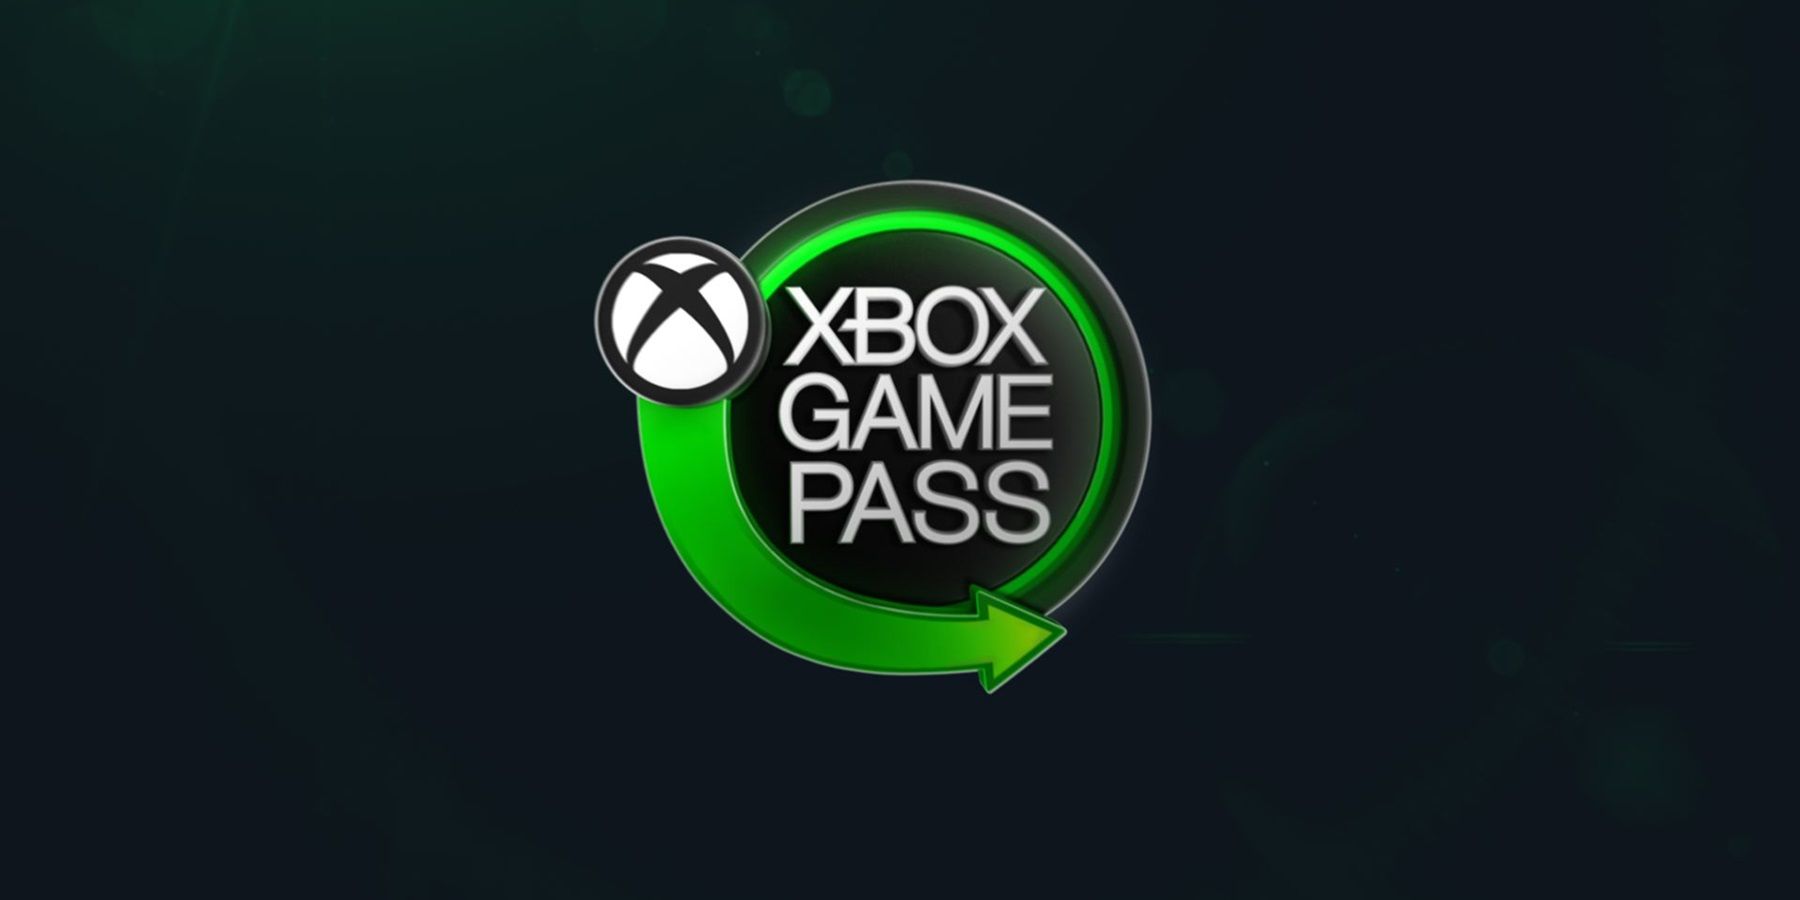 November 9 is Going to Be a Big Day for Xbox Game Pass